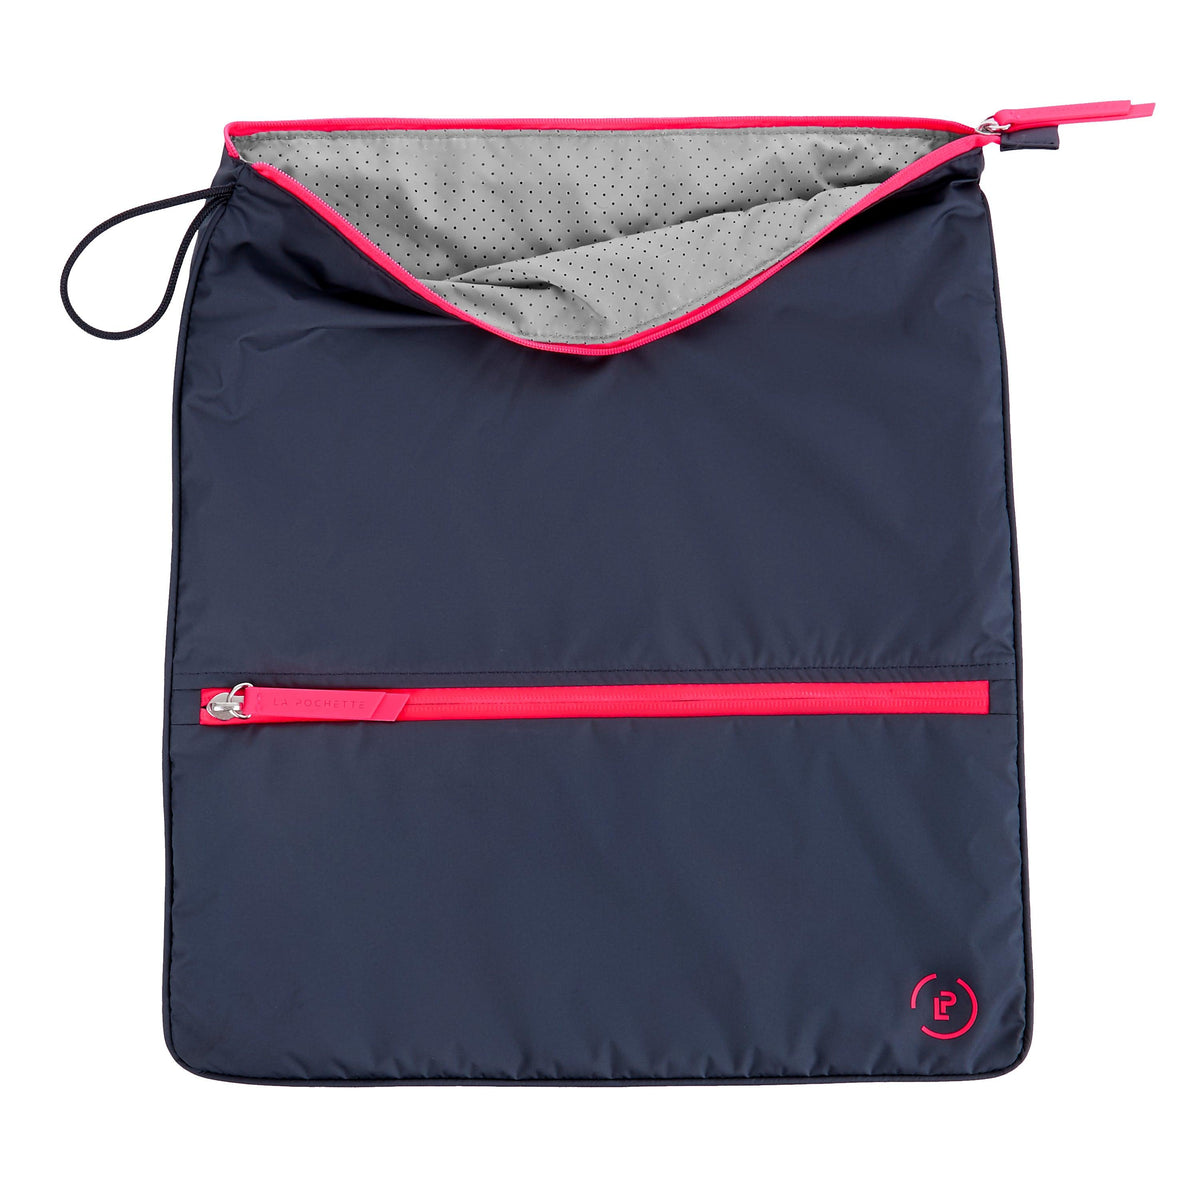 Midnight Neon Pink Sweat Bag lying flat, showing unzipped top to reveal inner perforated grey lining